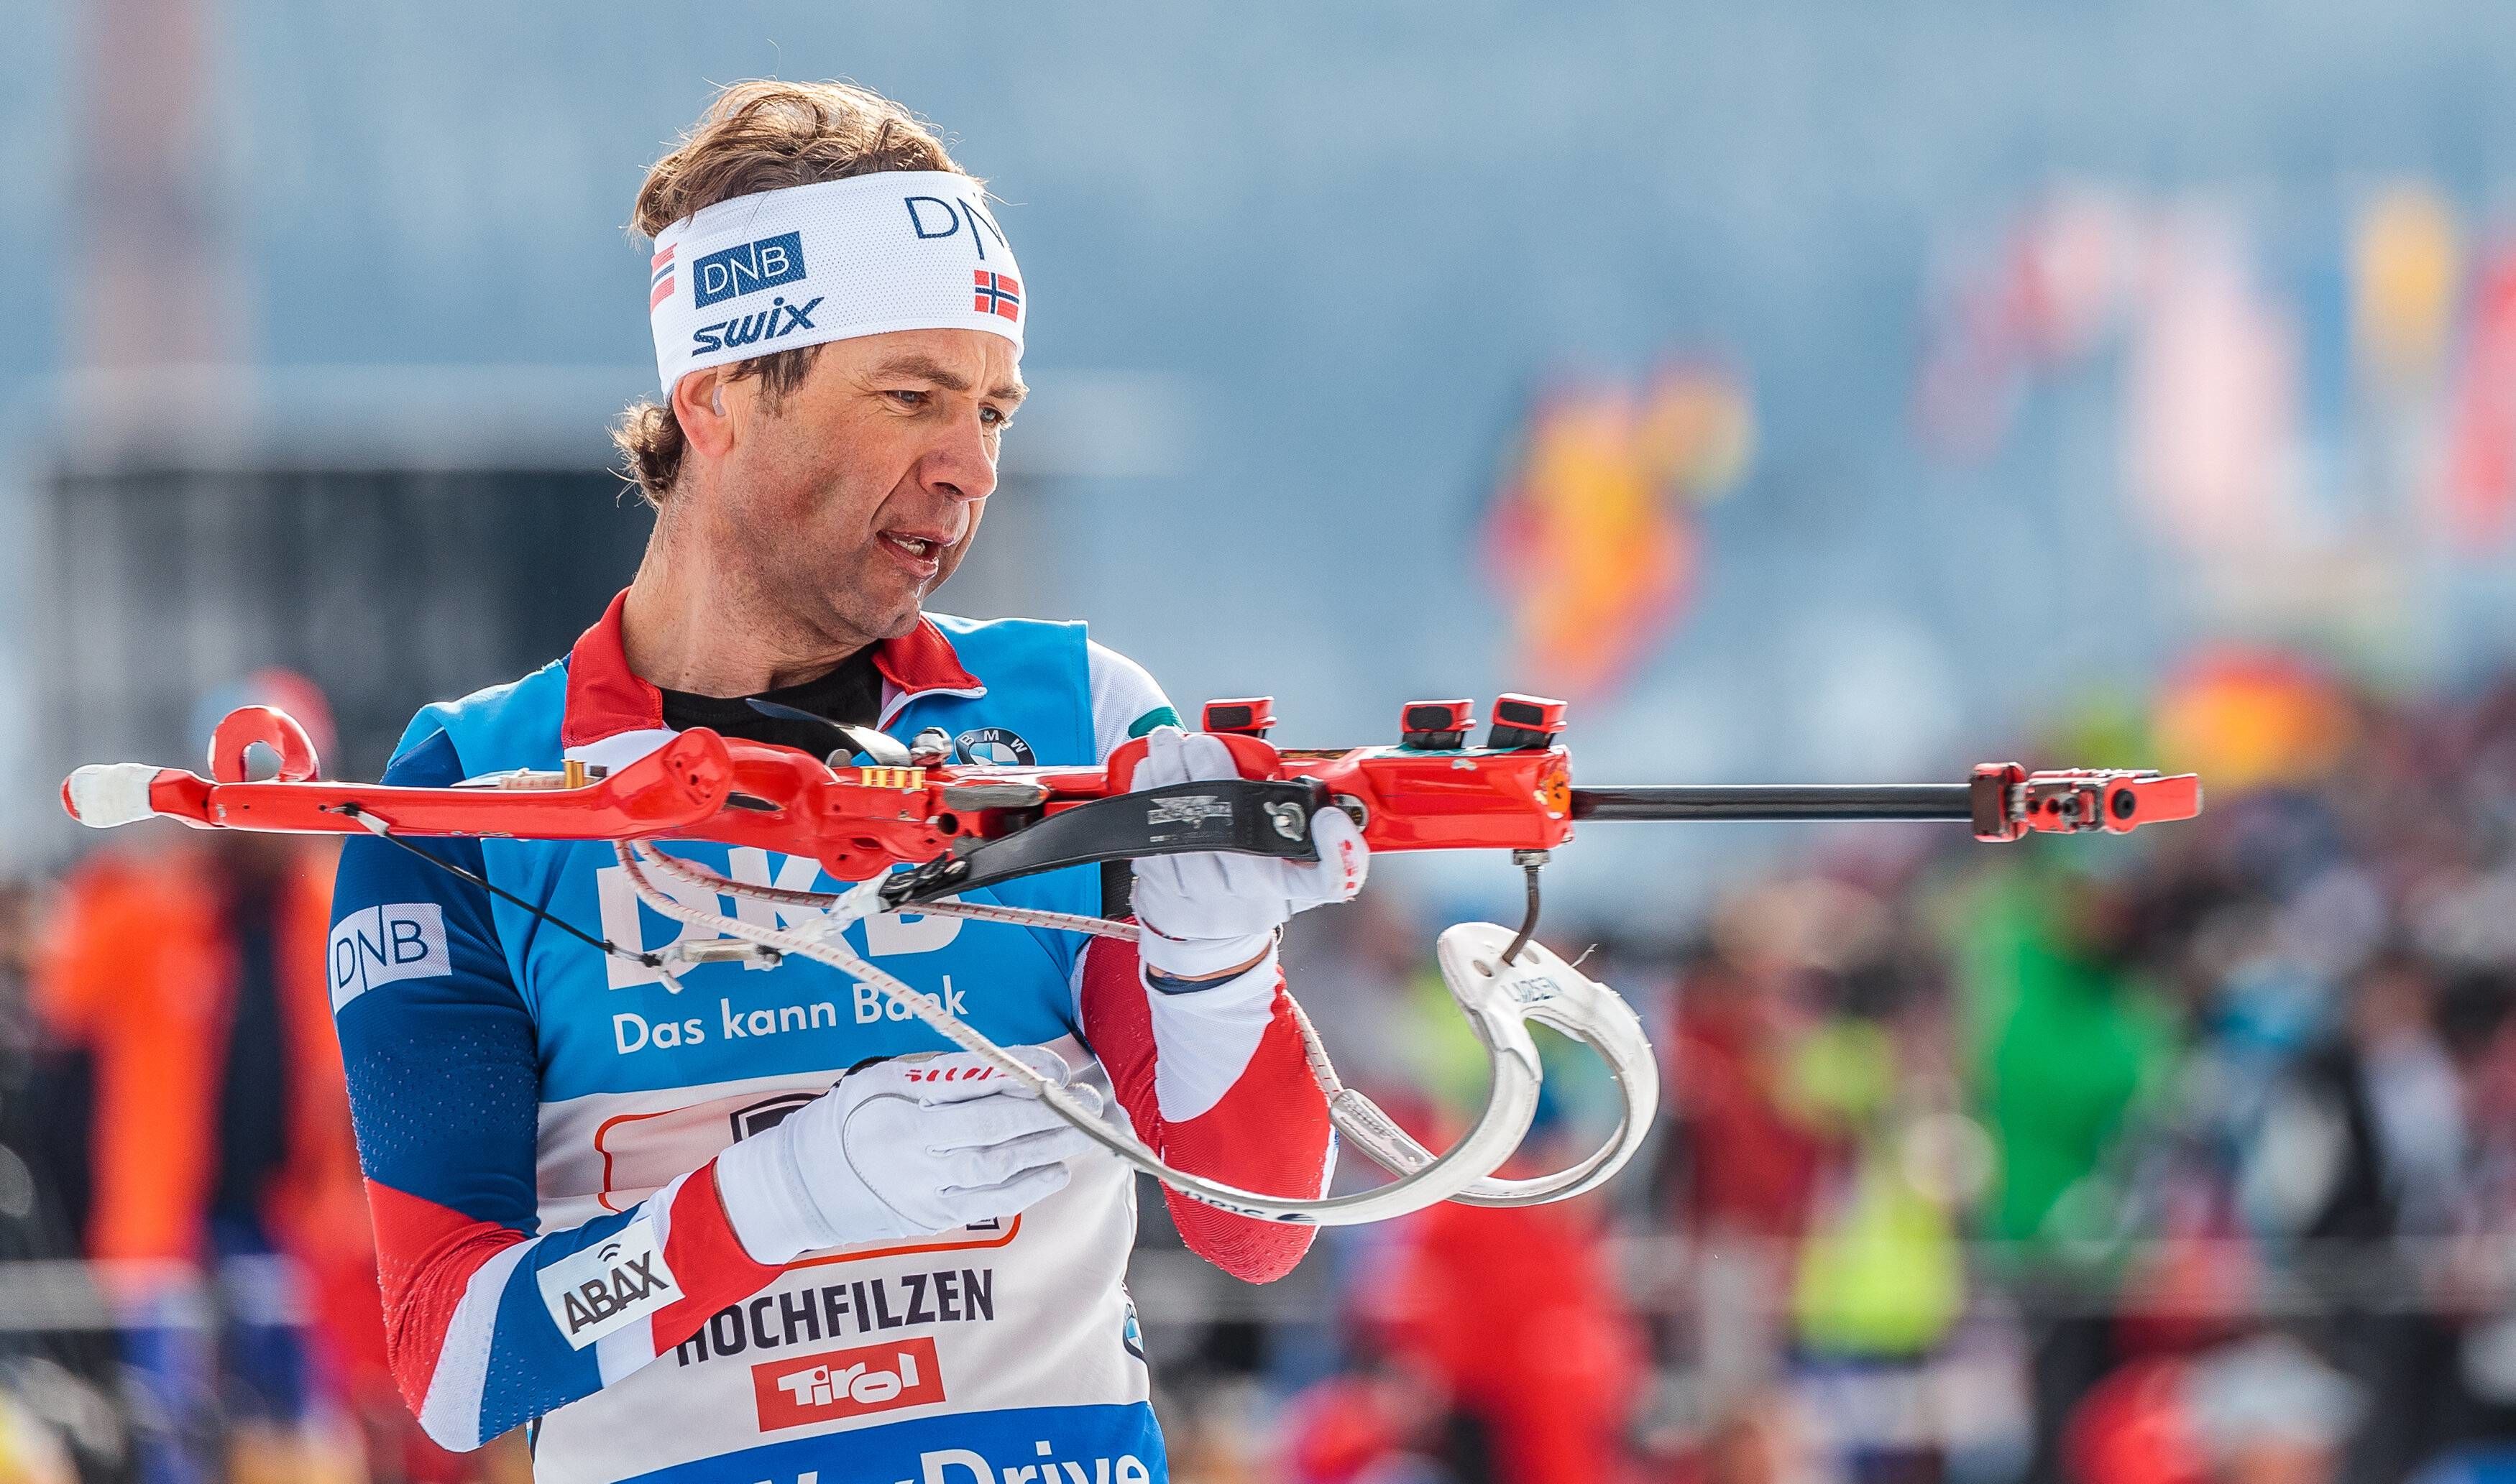 Bjørndalen considers it a disaster that cross-country skiing development is going in the wrong direction